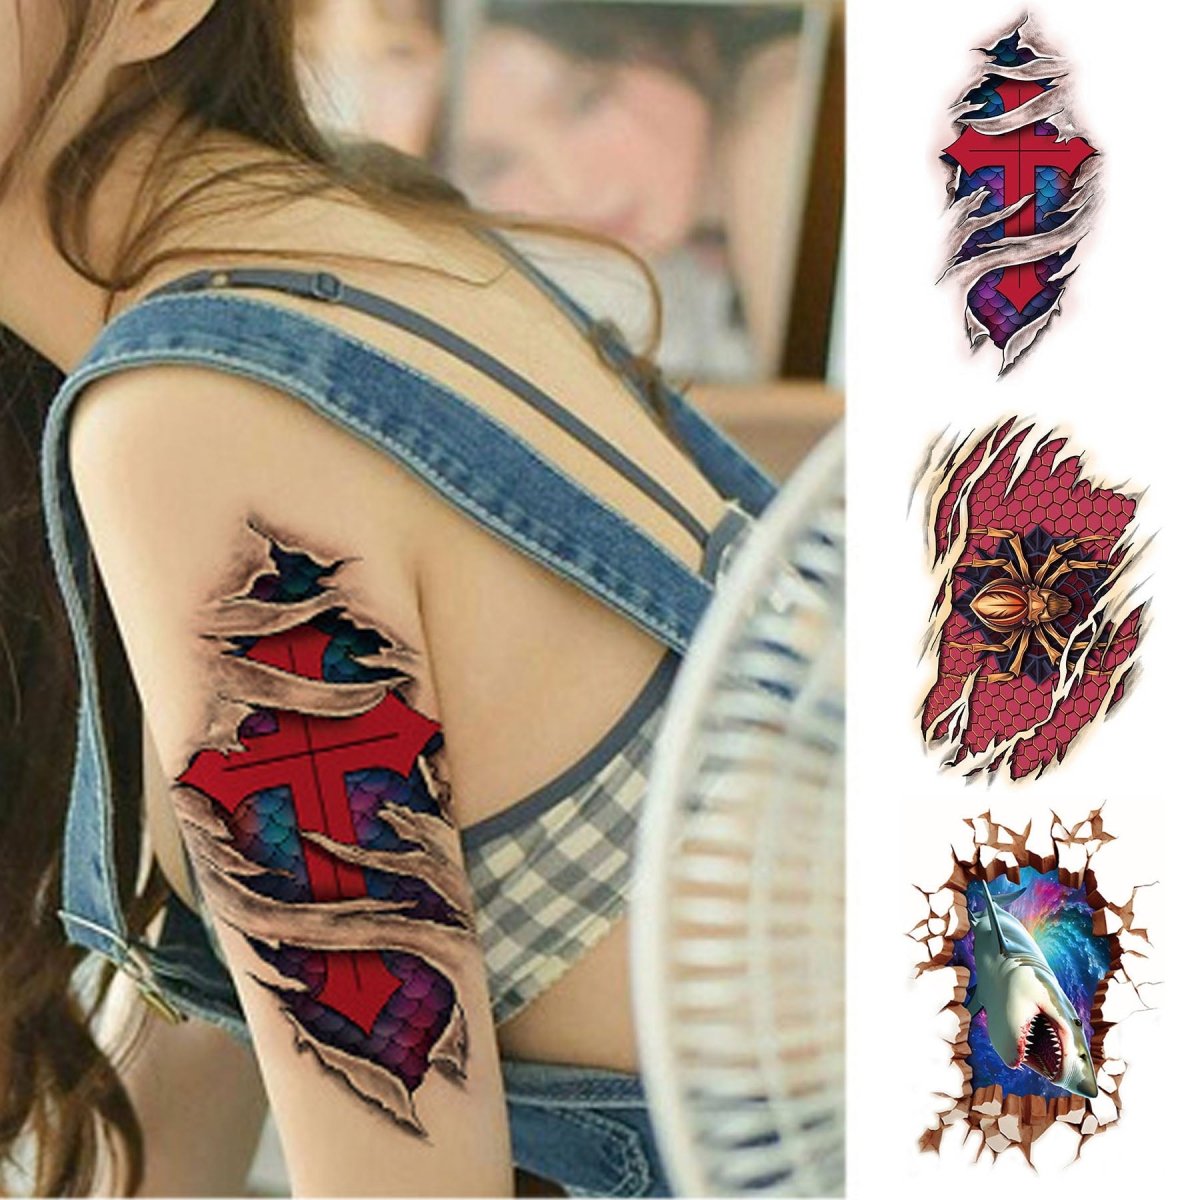 Realistic 3D Black Skull Compass Eyes Skull Temporary Tattoos For Men Wolf  Forest Design Body Art Paper From Soapsane, $8.13 | DHgate.Com